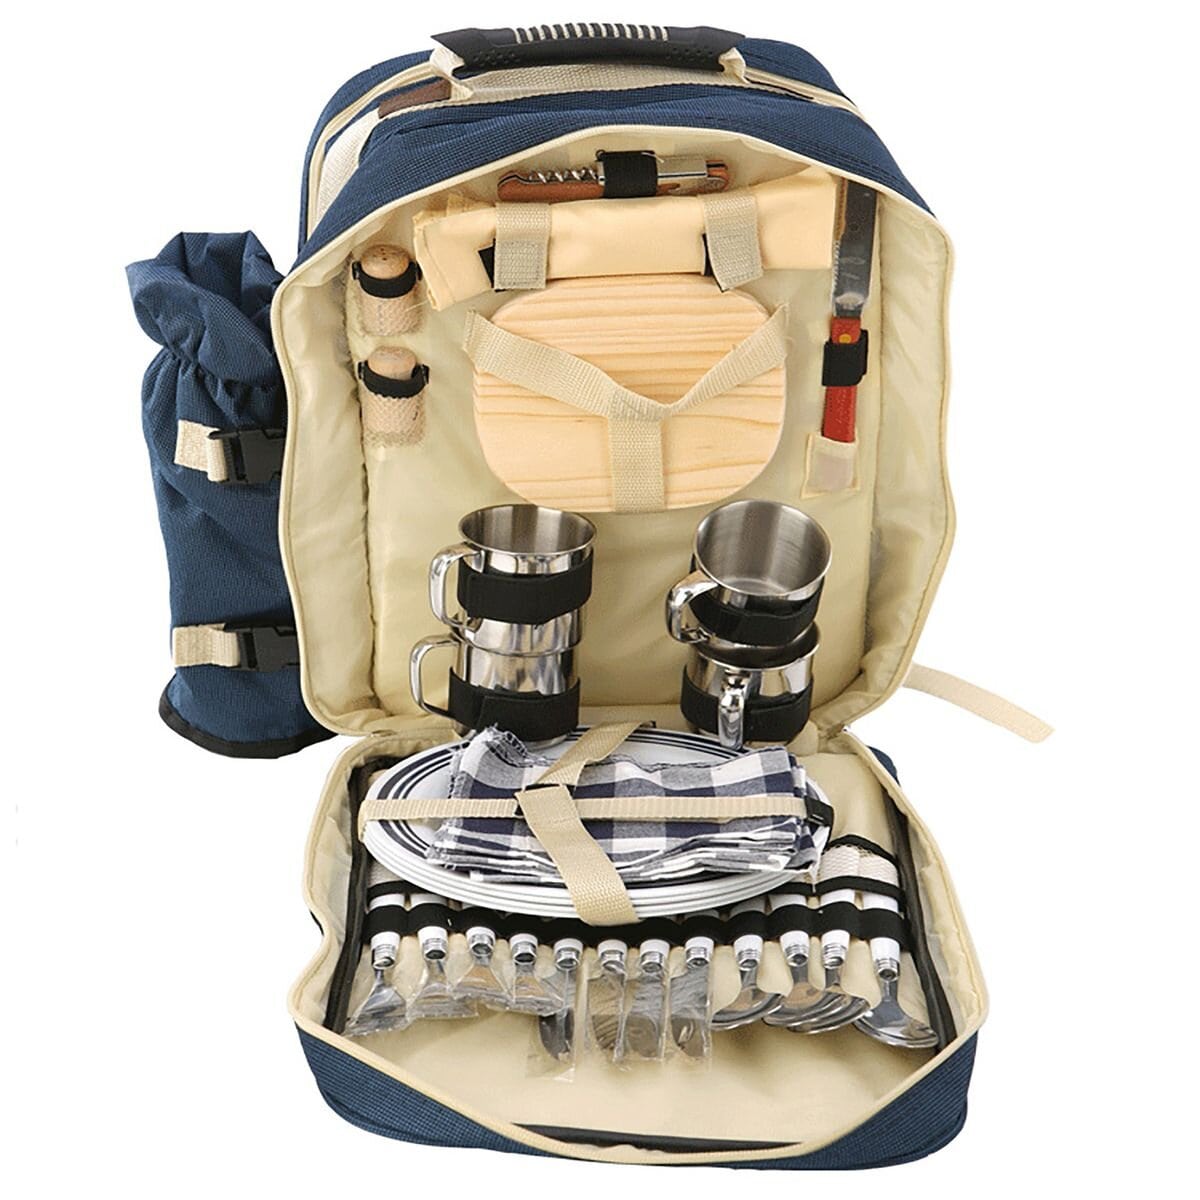 All-in-One Complete Cutlery Set Camping Picnic Backpack for 4